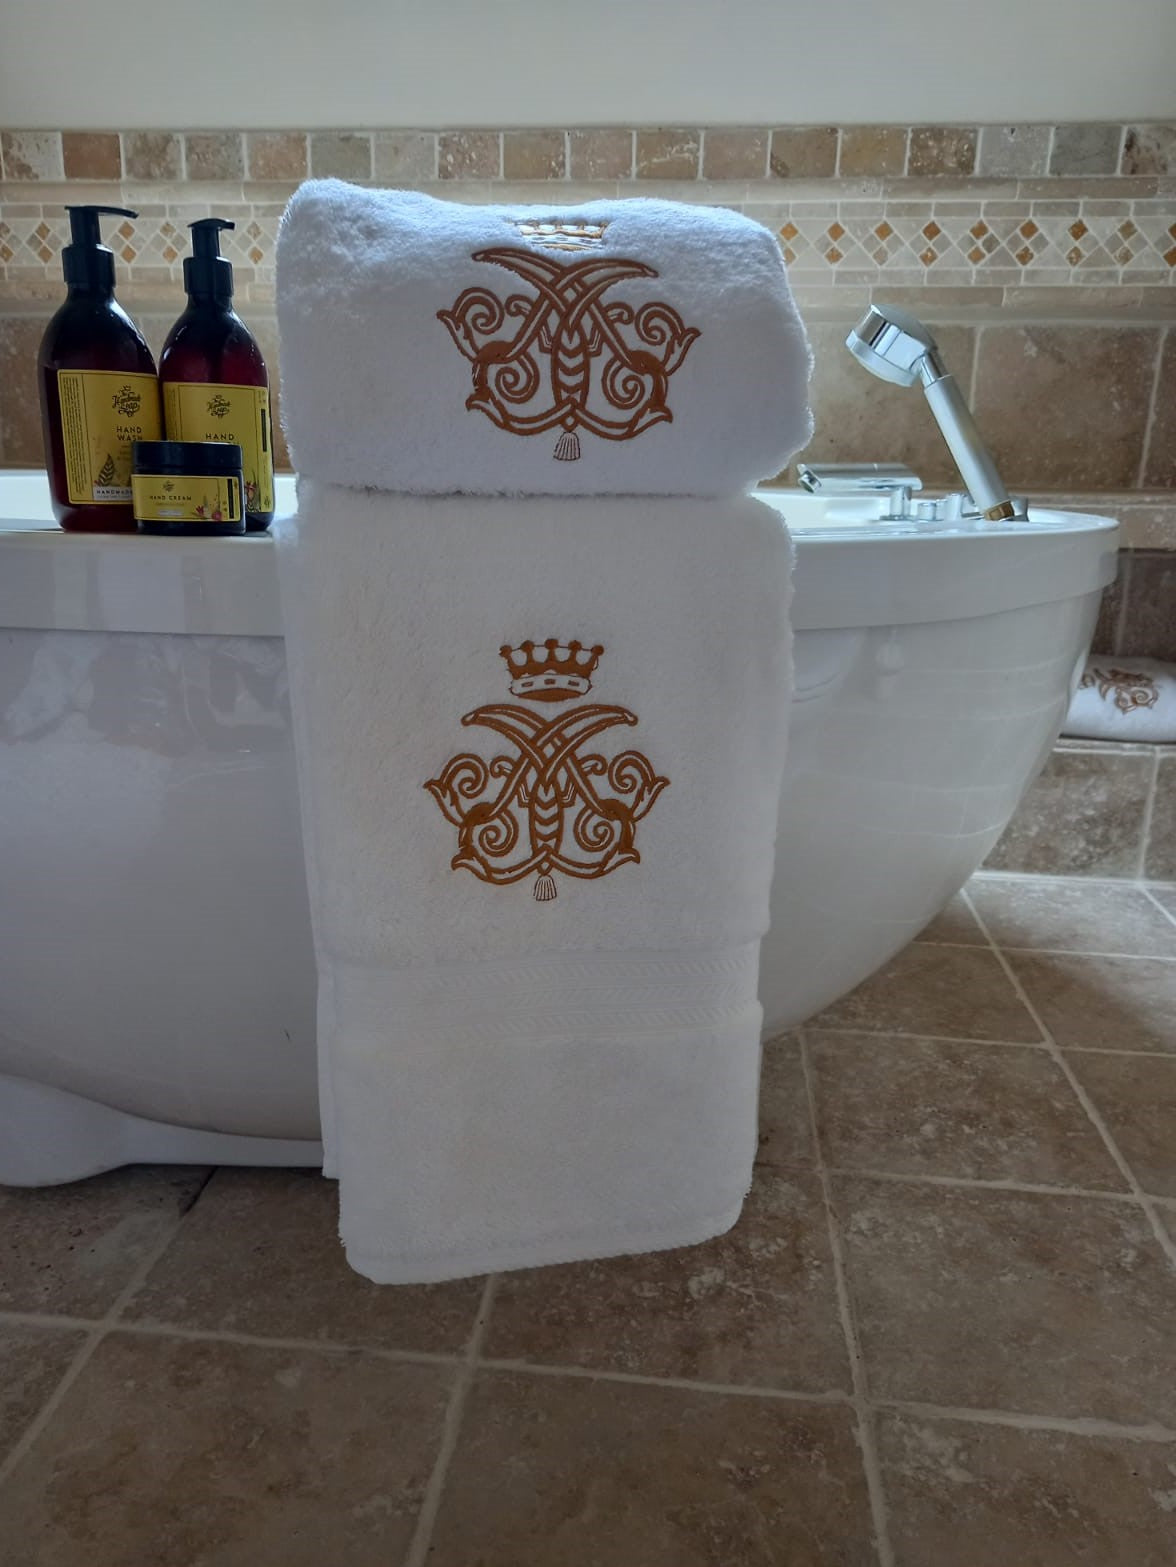 Ashford Castle Towels Mrs Tea's Boutique and Bakery